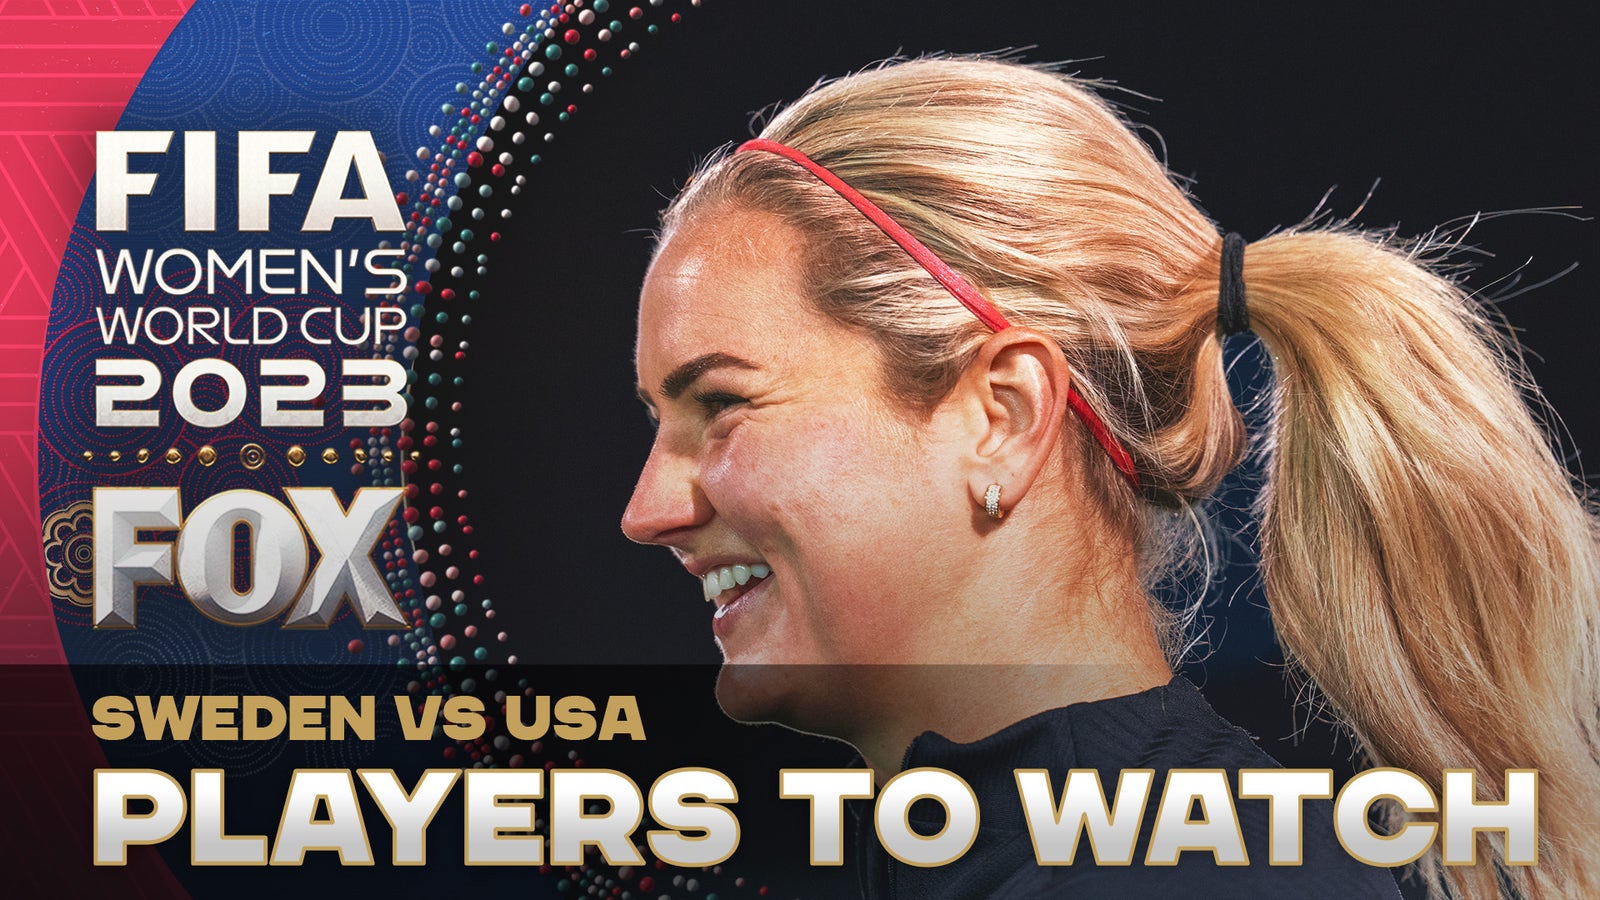 Lindsey Horan leads players to watch vs. Sweden